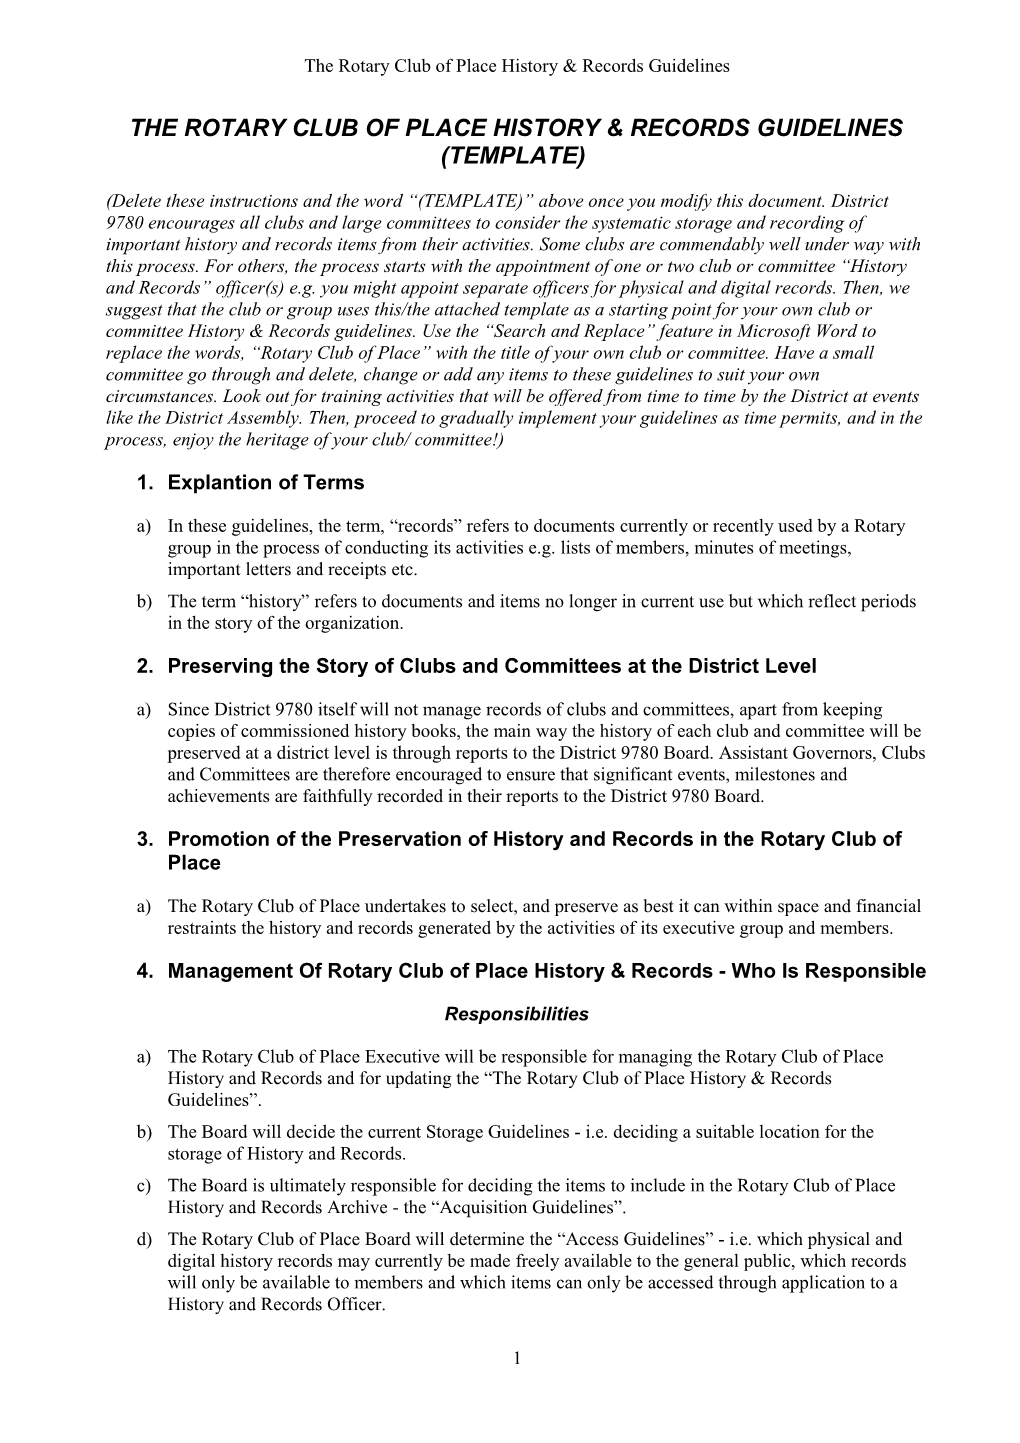 The Rotary Club of Place History & Records Guidelines